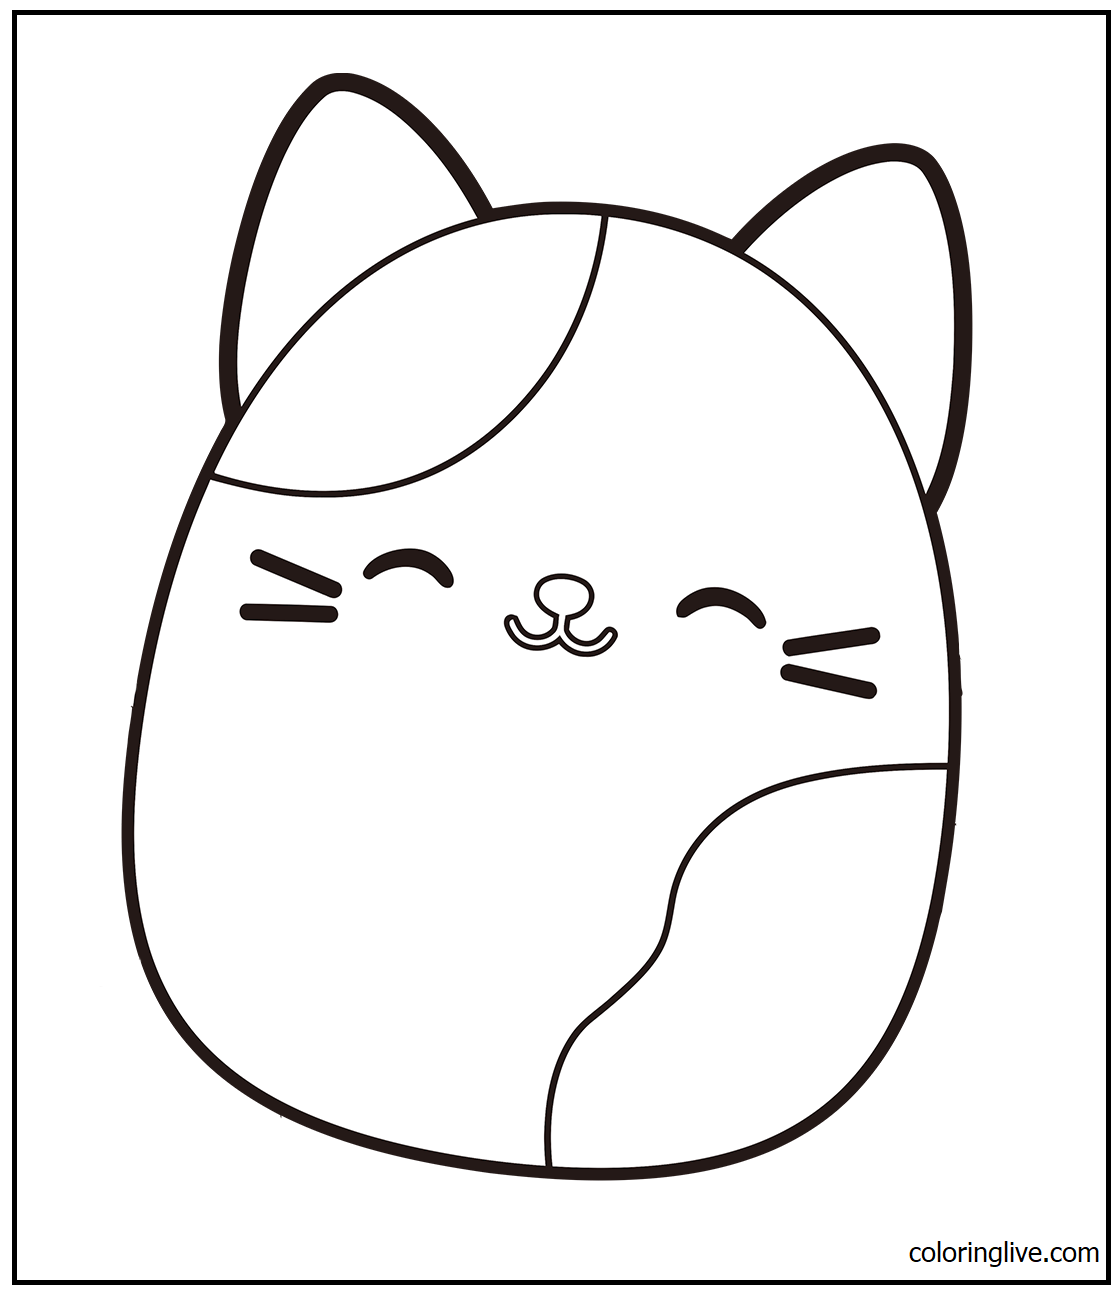 Printable Squishmallow   4 Coloring Page for kids.